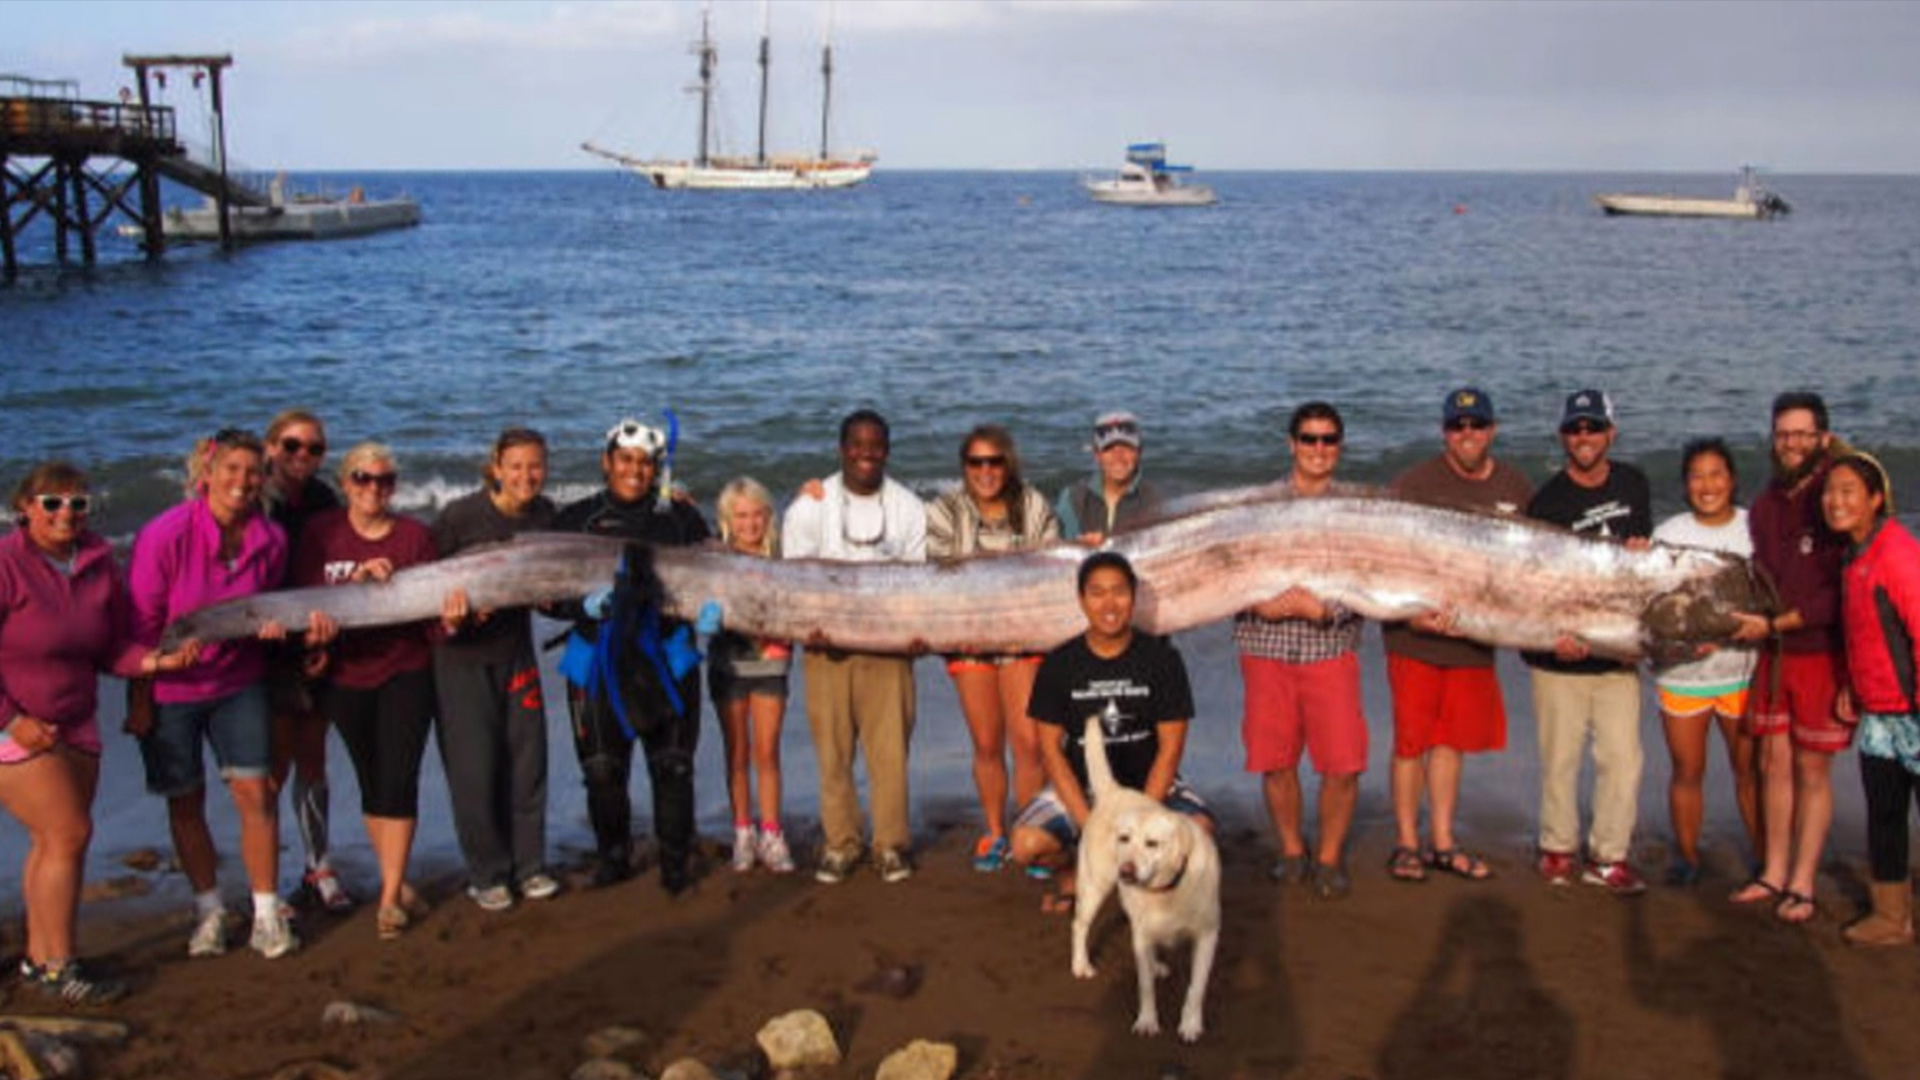 Can oarfish predict earthquakes? Maybe it's not as crazy as it sounds